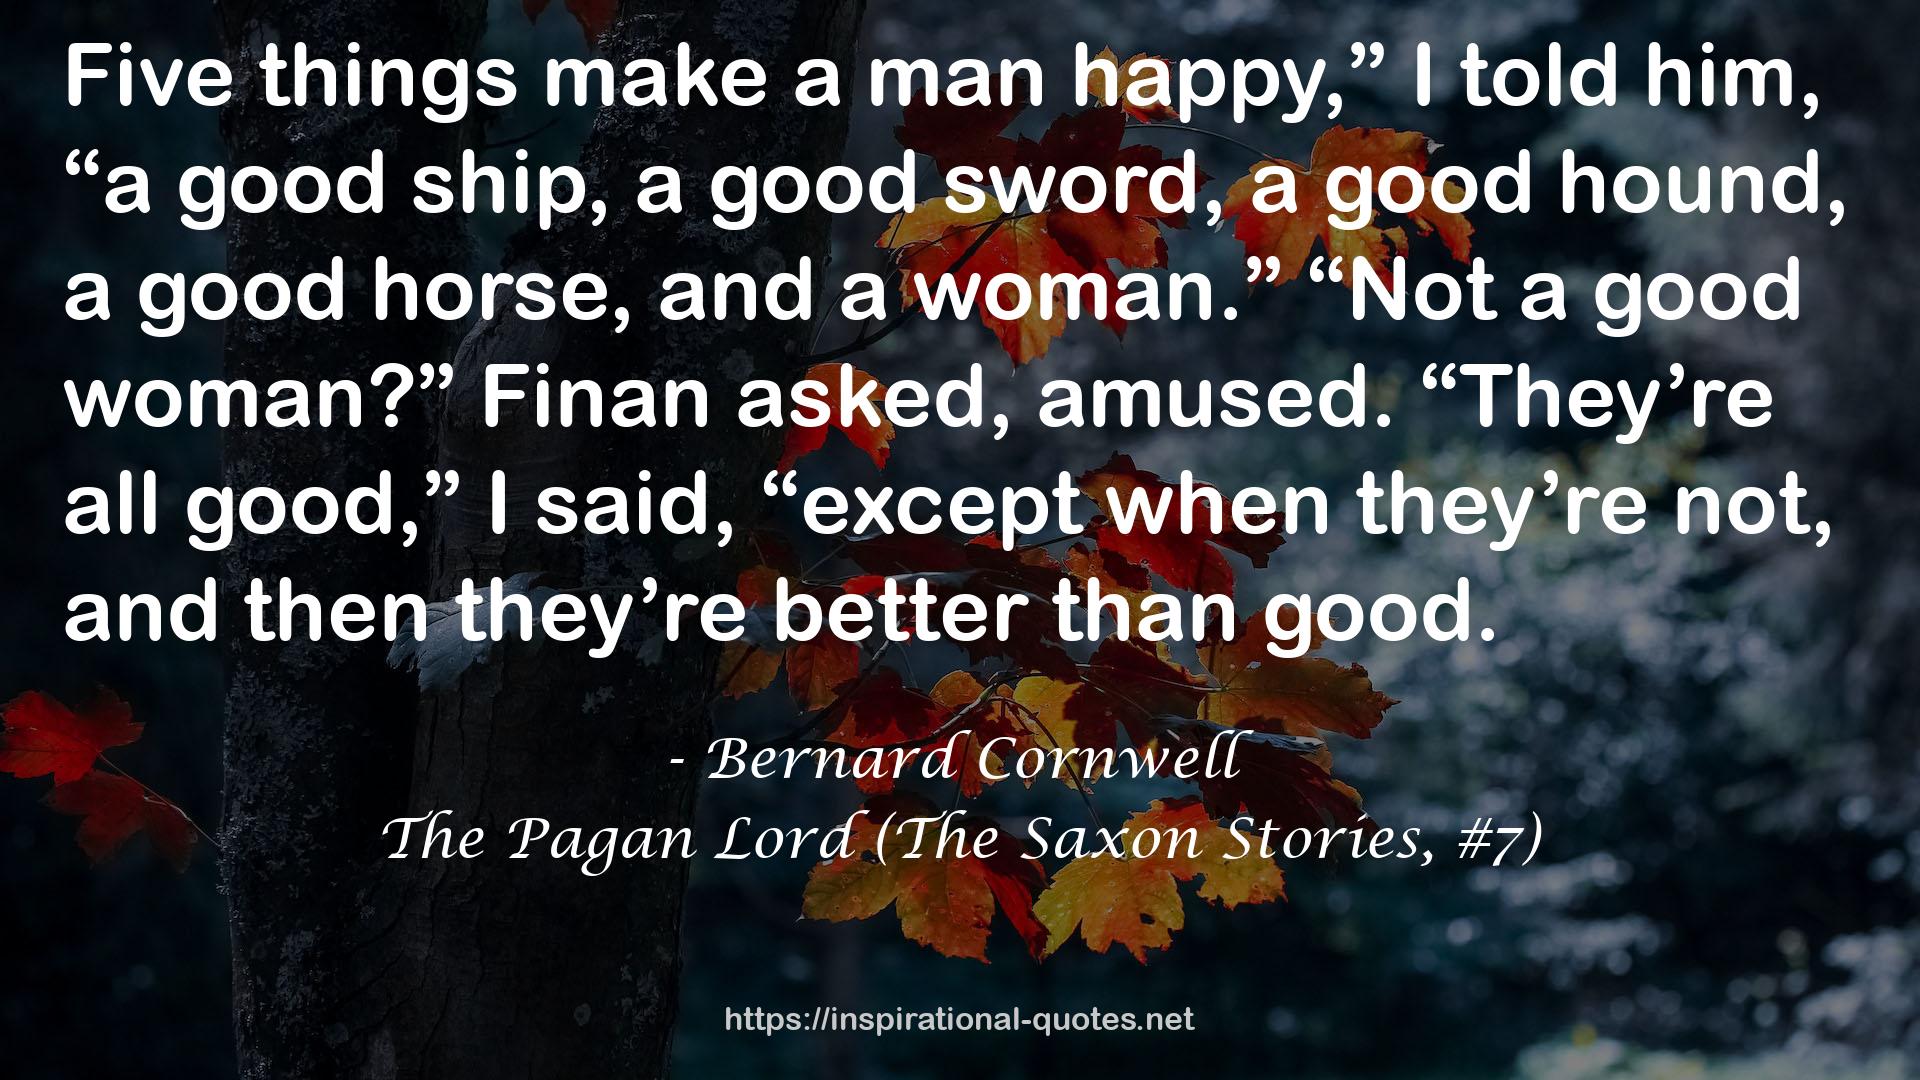 The Pagan Lord (The Saxon Stories, #7) QUOTES